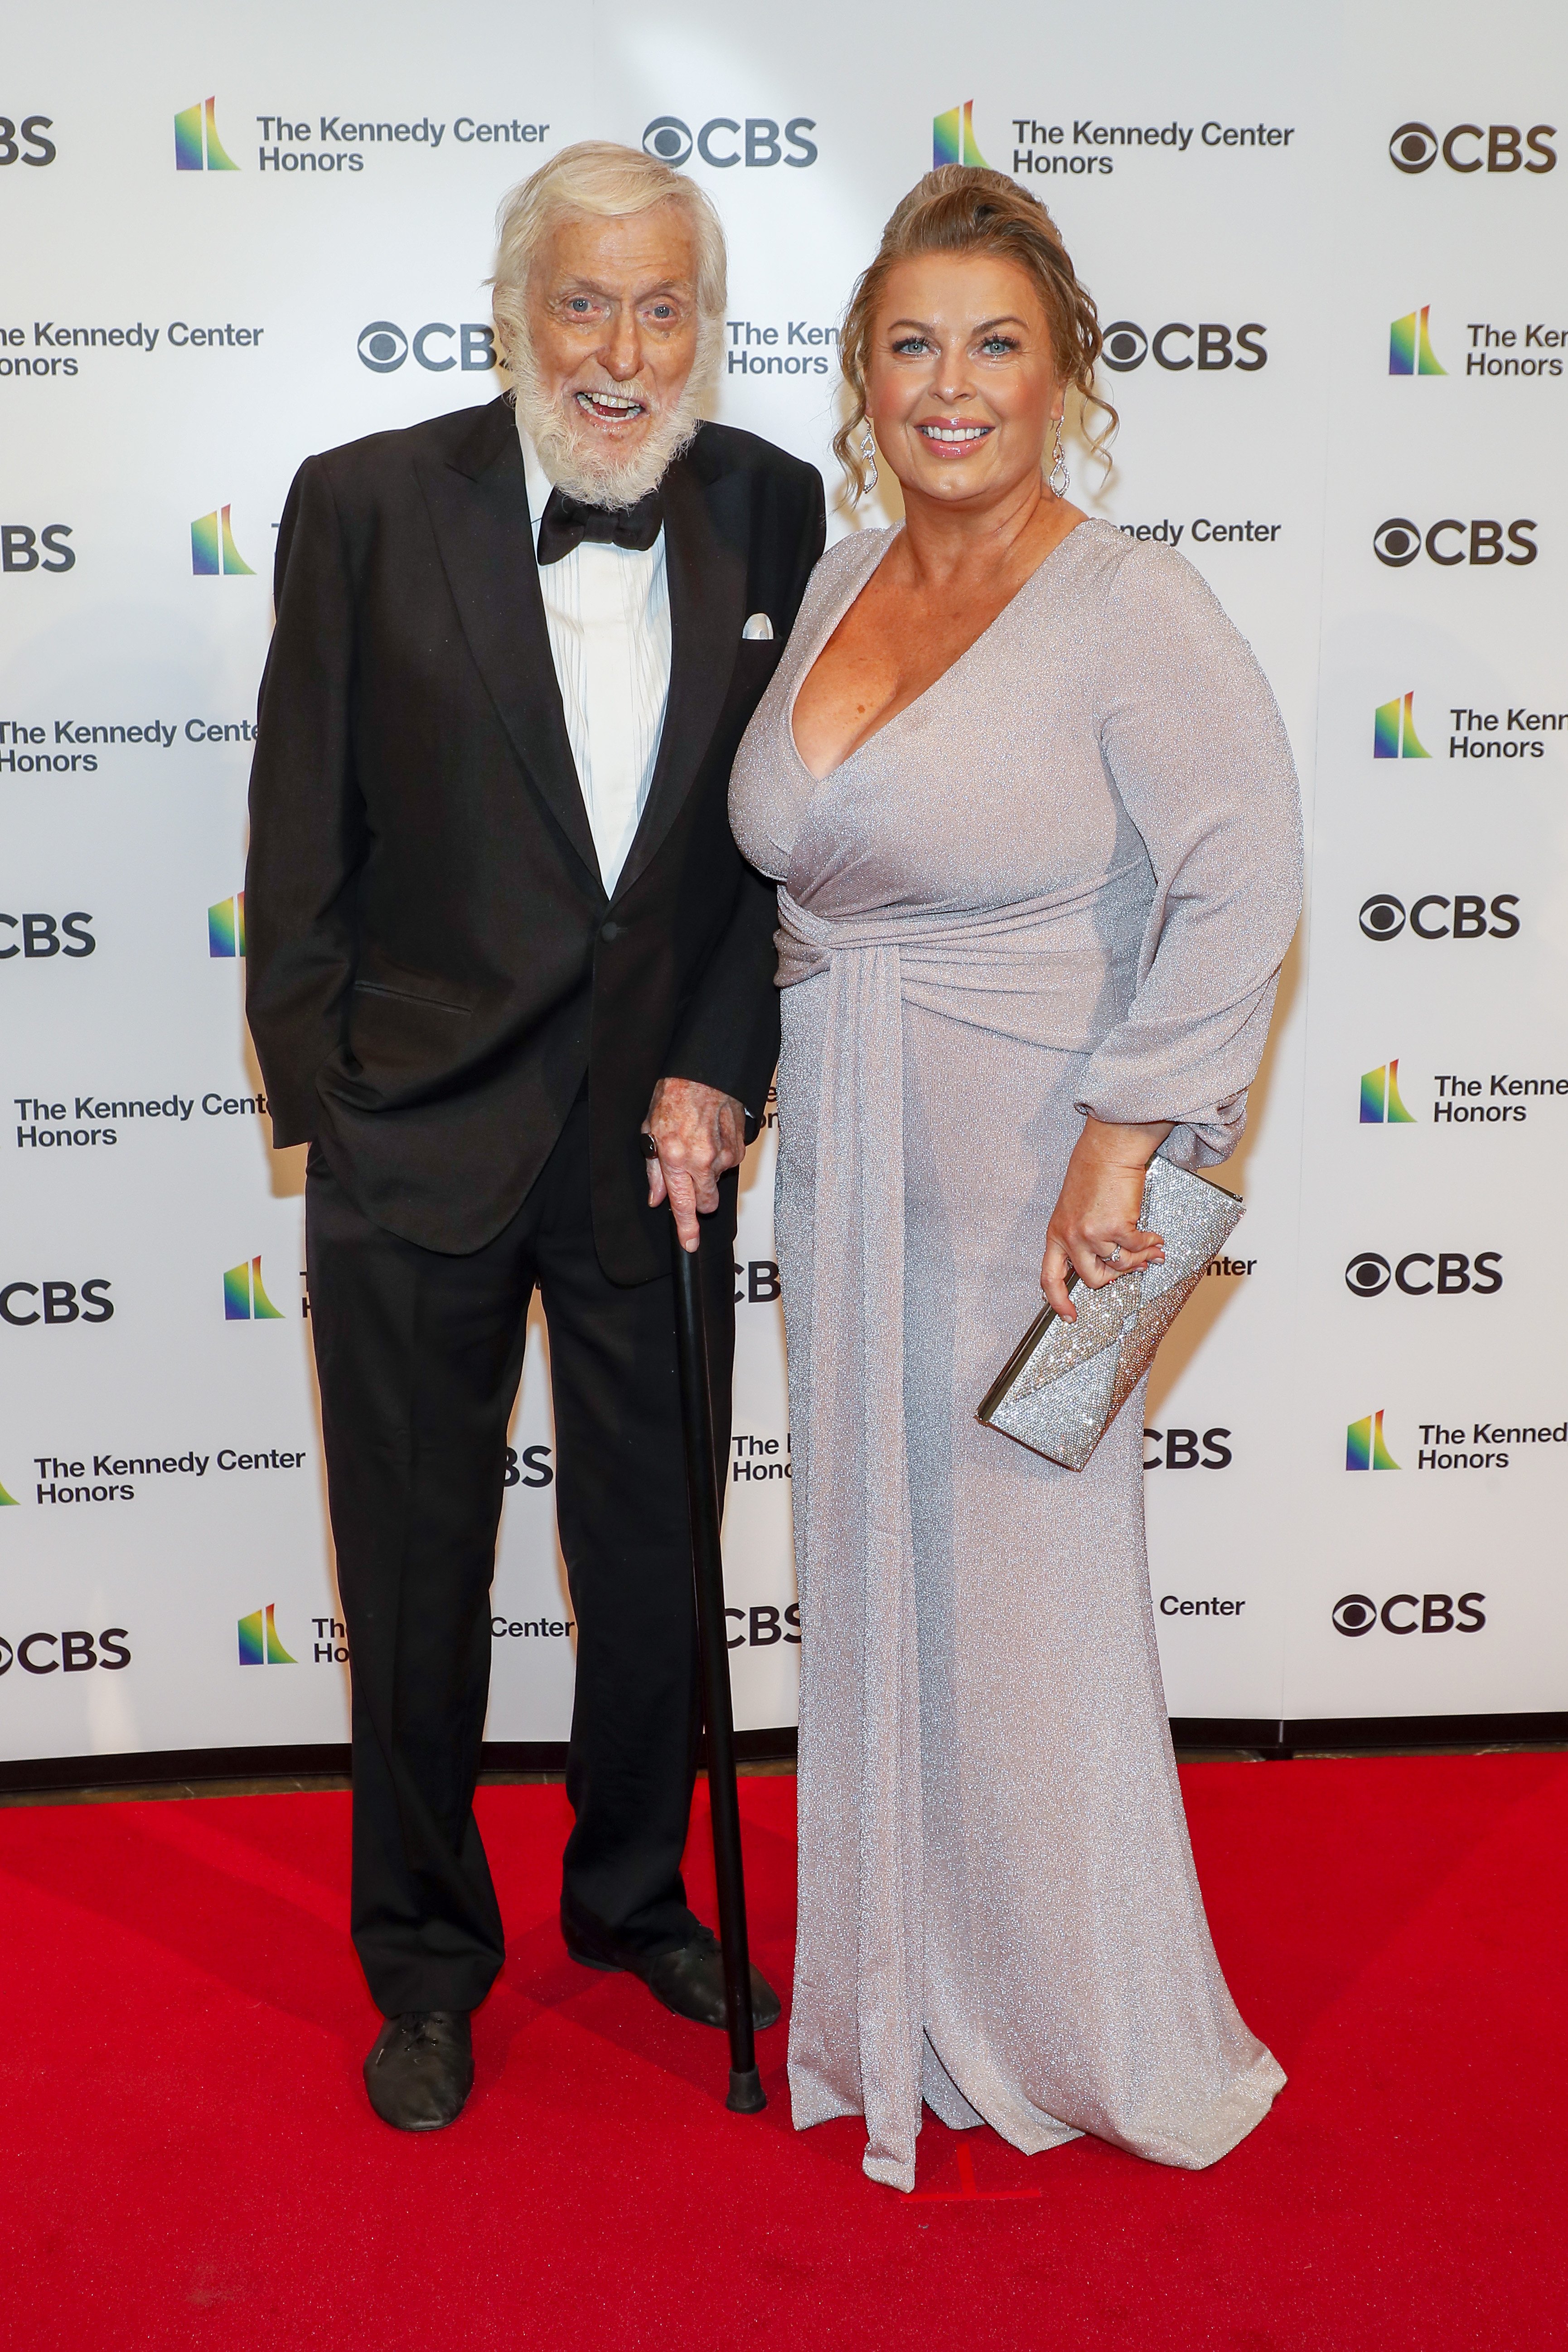 Dick Van Dyke and Arlene Silver attend the 43rd Annual Kennedy Center Honors at The Kennedy Center on May 21, 2021, in Washington, DC. | Source: Getty Images